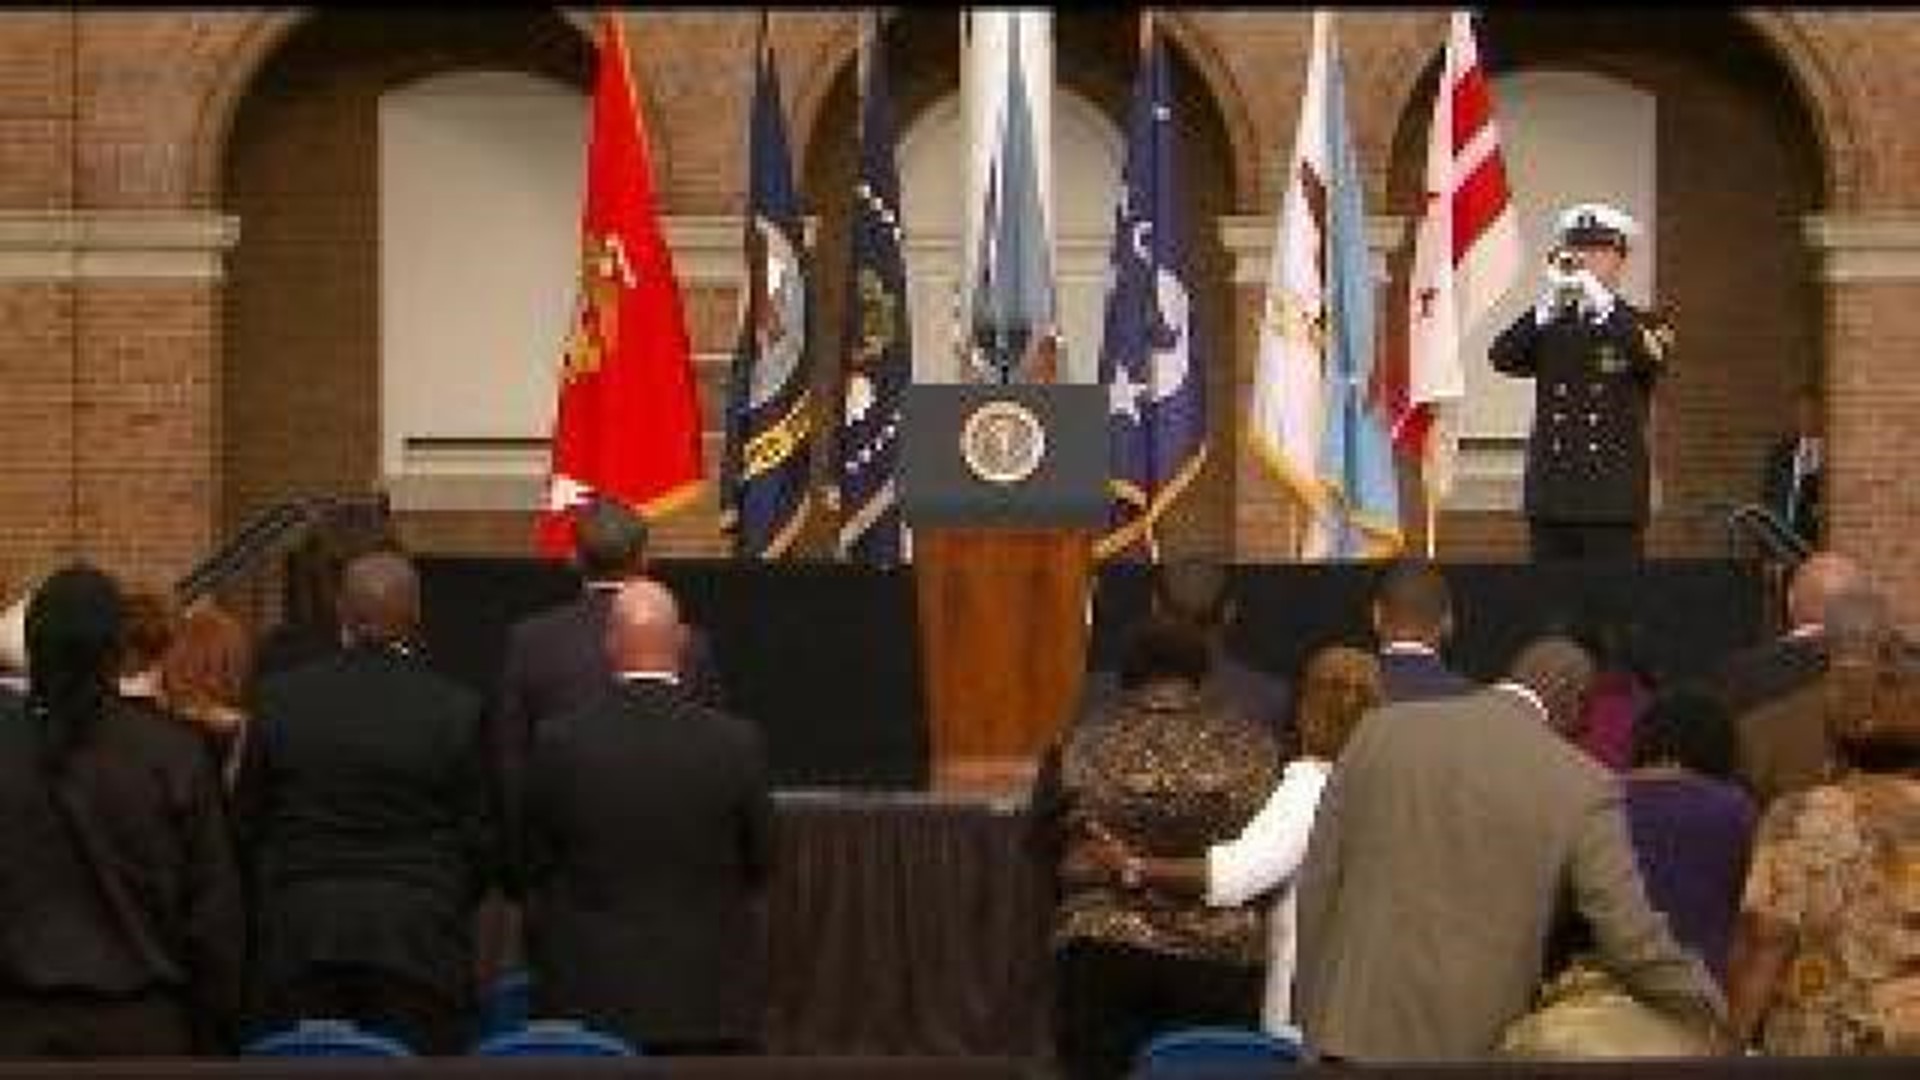 Memorial service held for victims of Navy Yard shooting